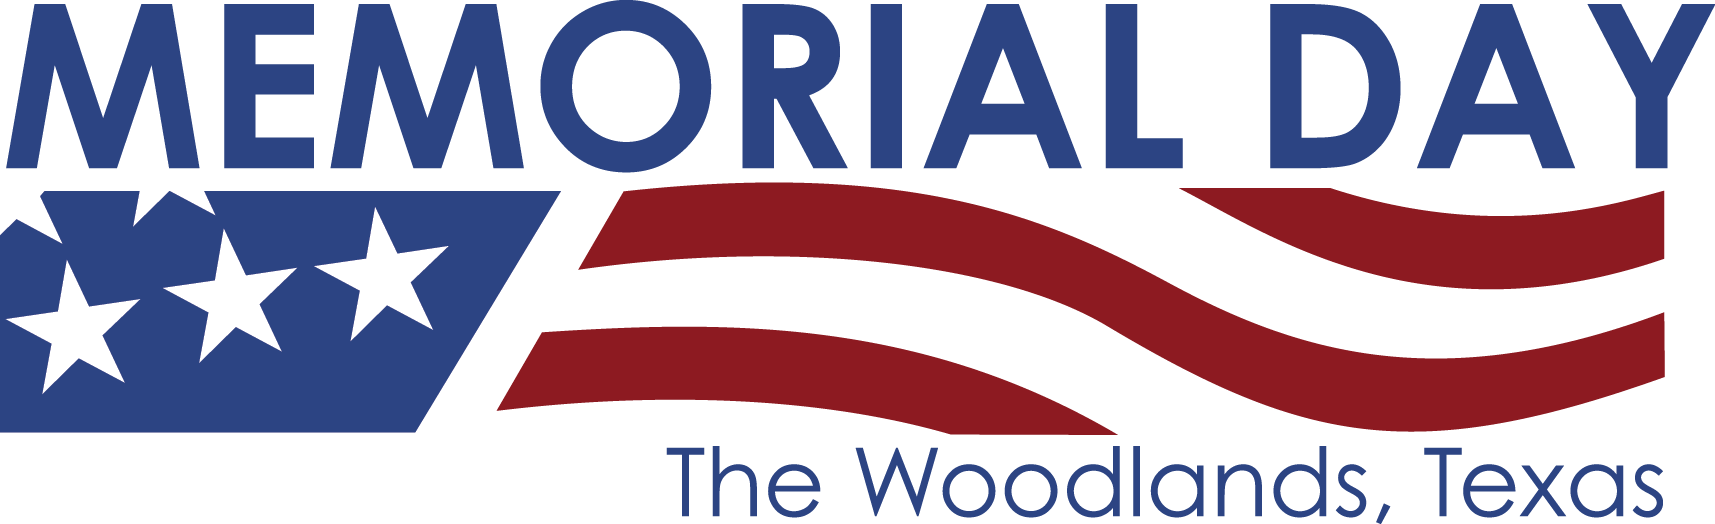 A Logo With Blue And Red Text